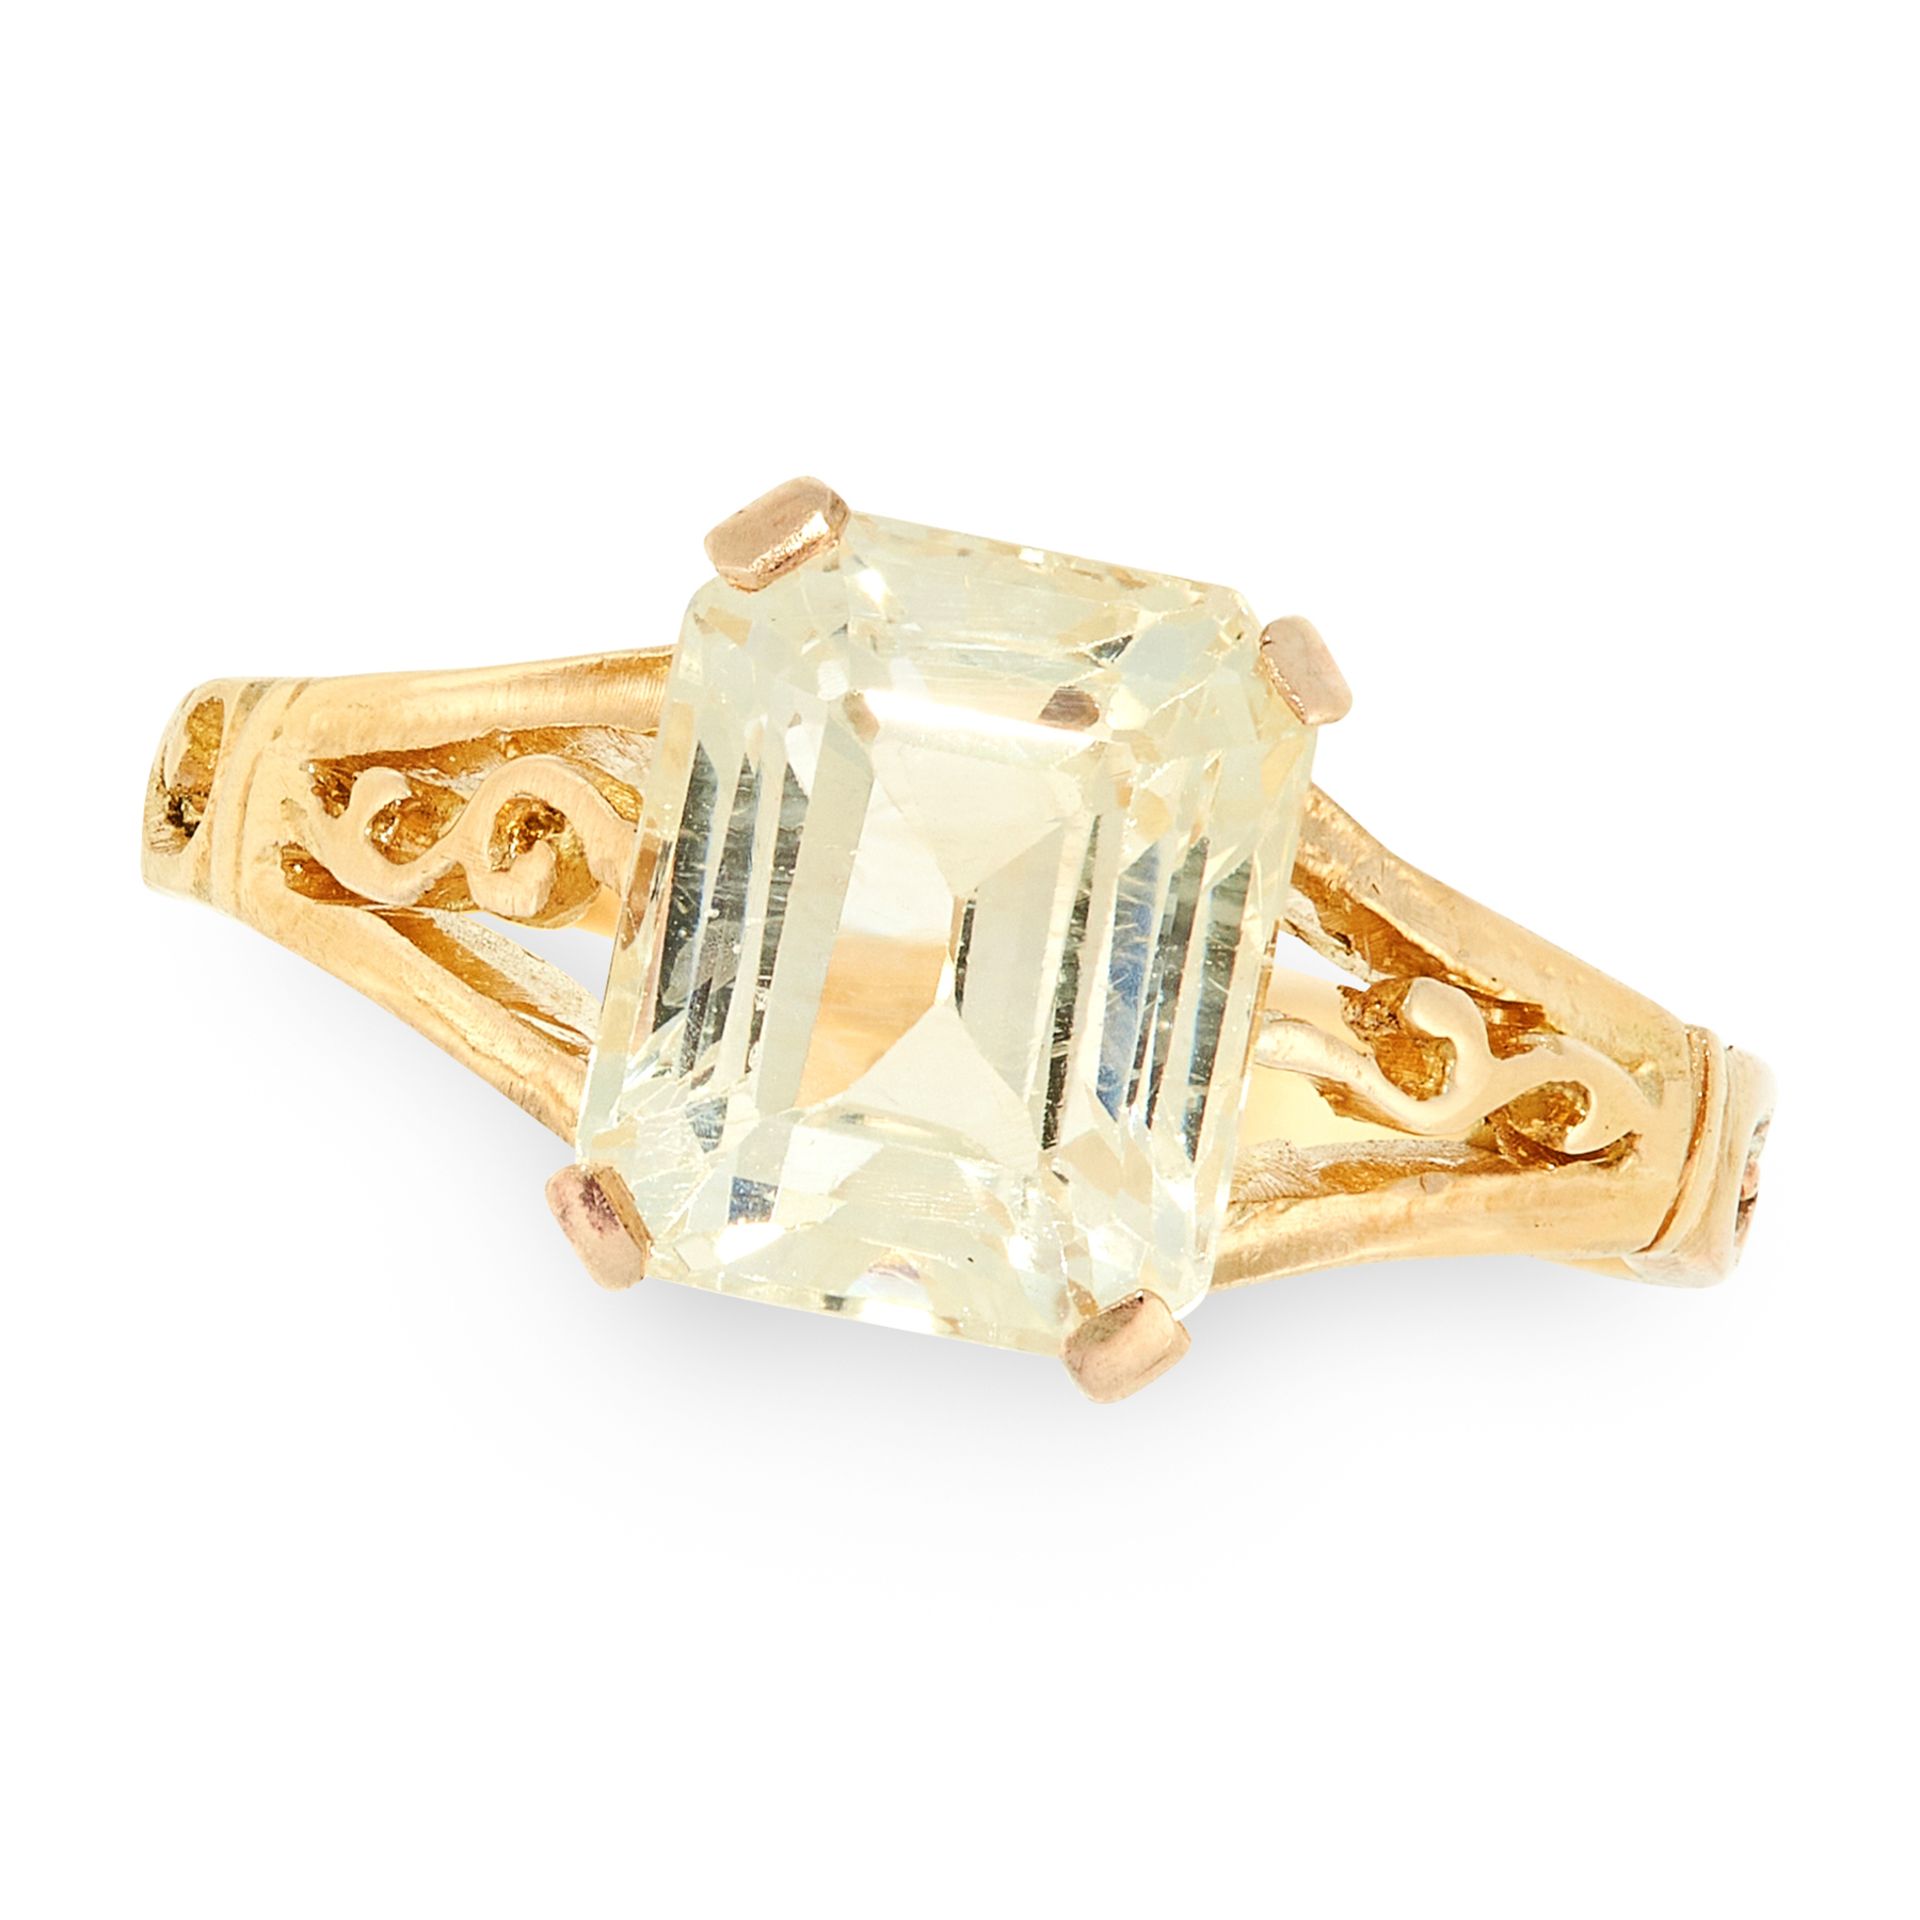 A YELLOW SAPPHIRE DRESS RING in yellow gold, set with an emerald cut yellow sapphire of 3.60 carats,